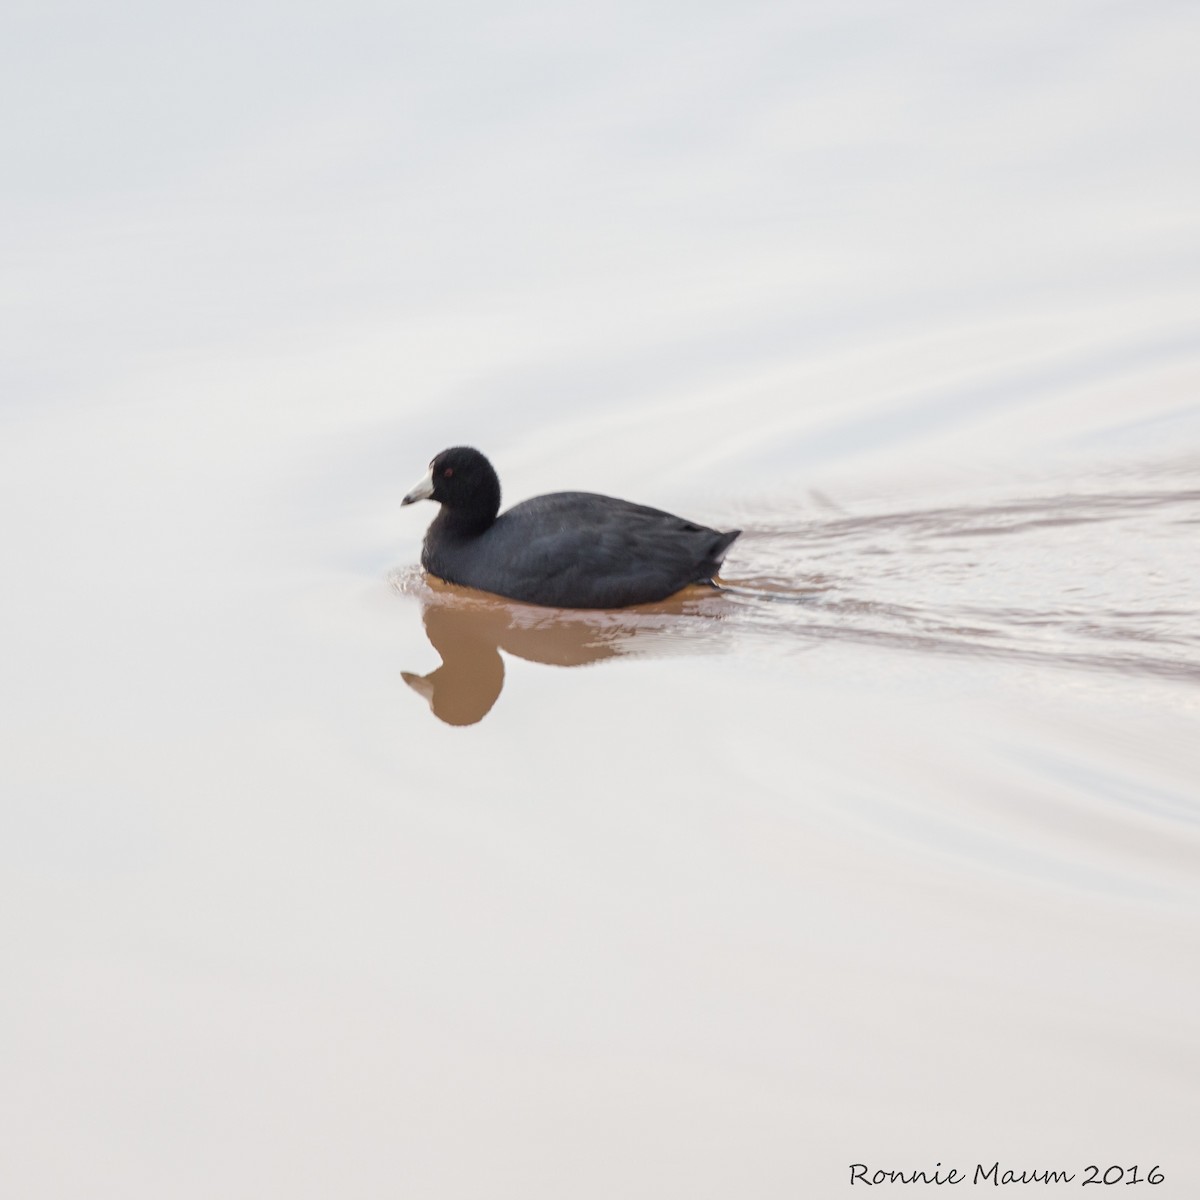 American Coot (Red-shielded) - Ronnie Maum